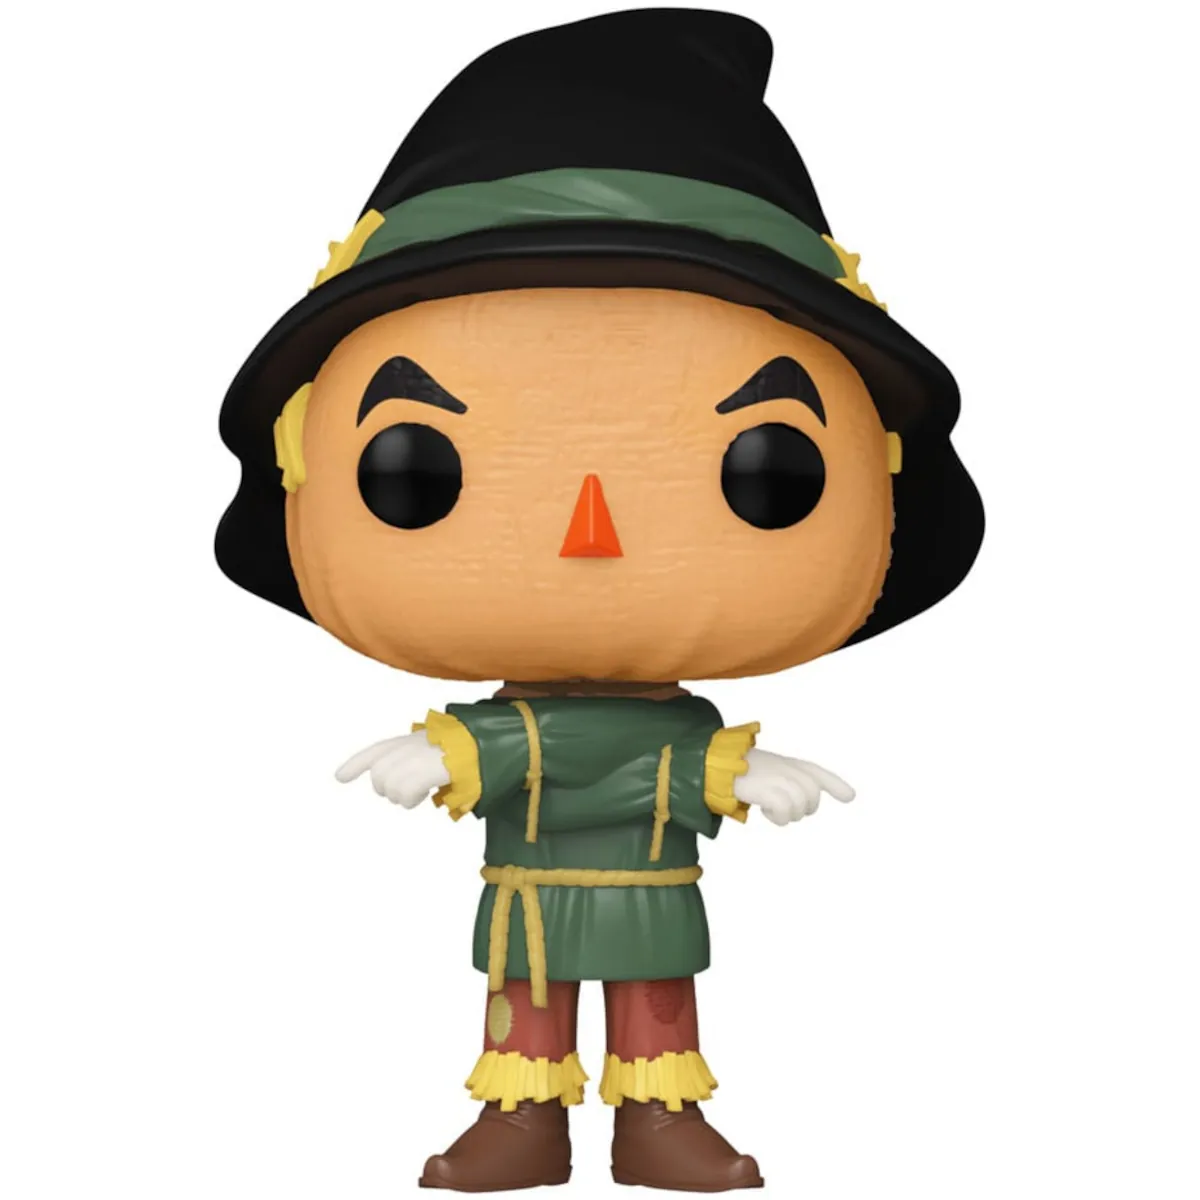 FK75975 Funko Pop! Movies – The Wizard of Oz (85th Anniversary) – Scarecrow Collectable Vinyl Figure